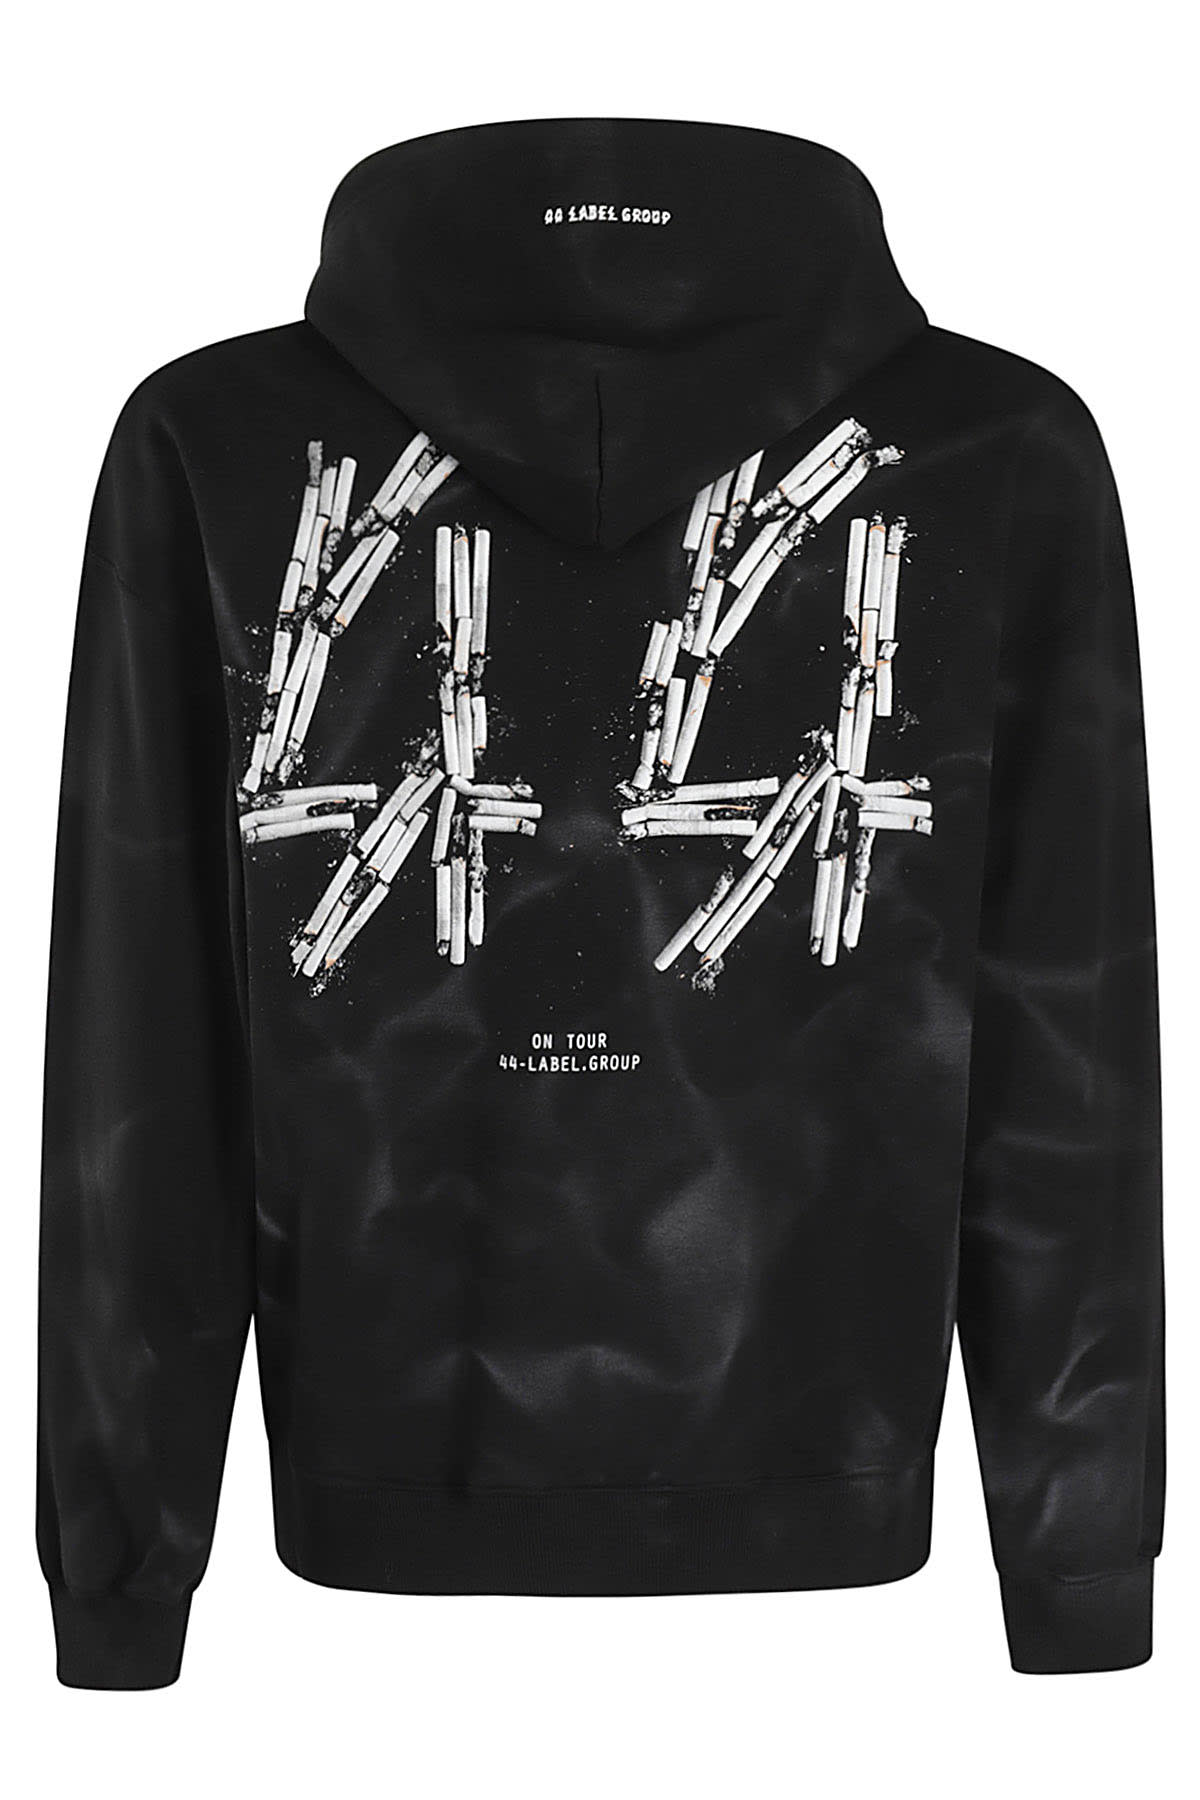 Shop 44 Label Group New Classic Hoodie